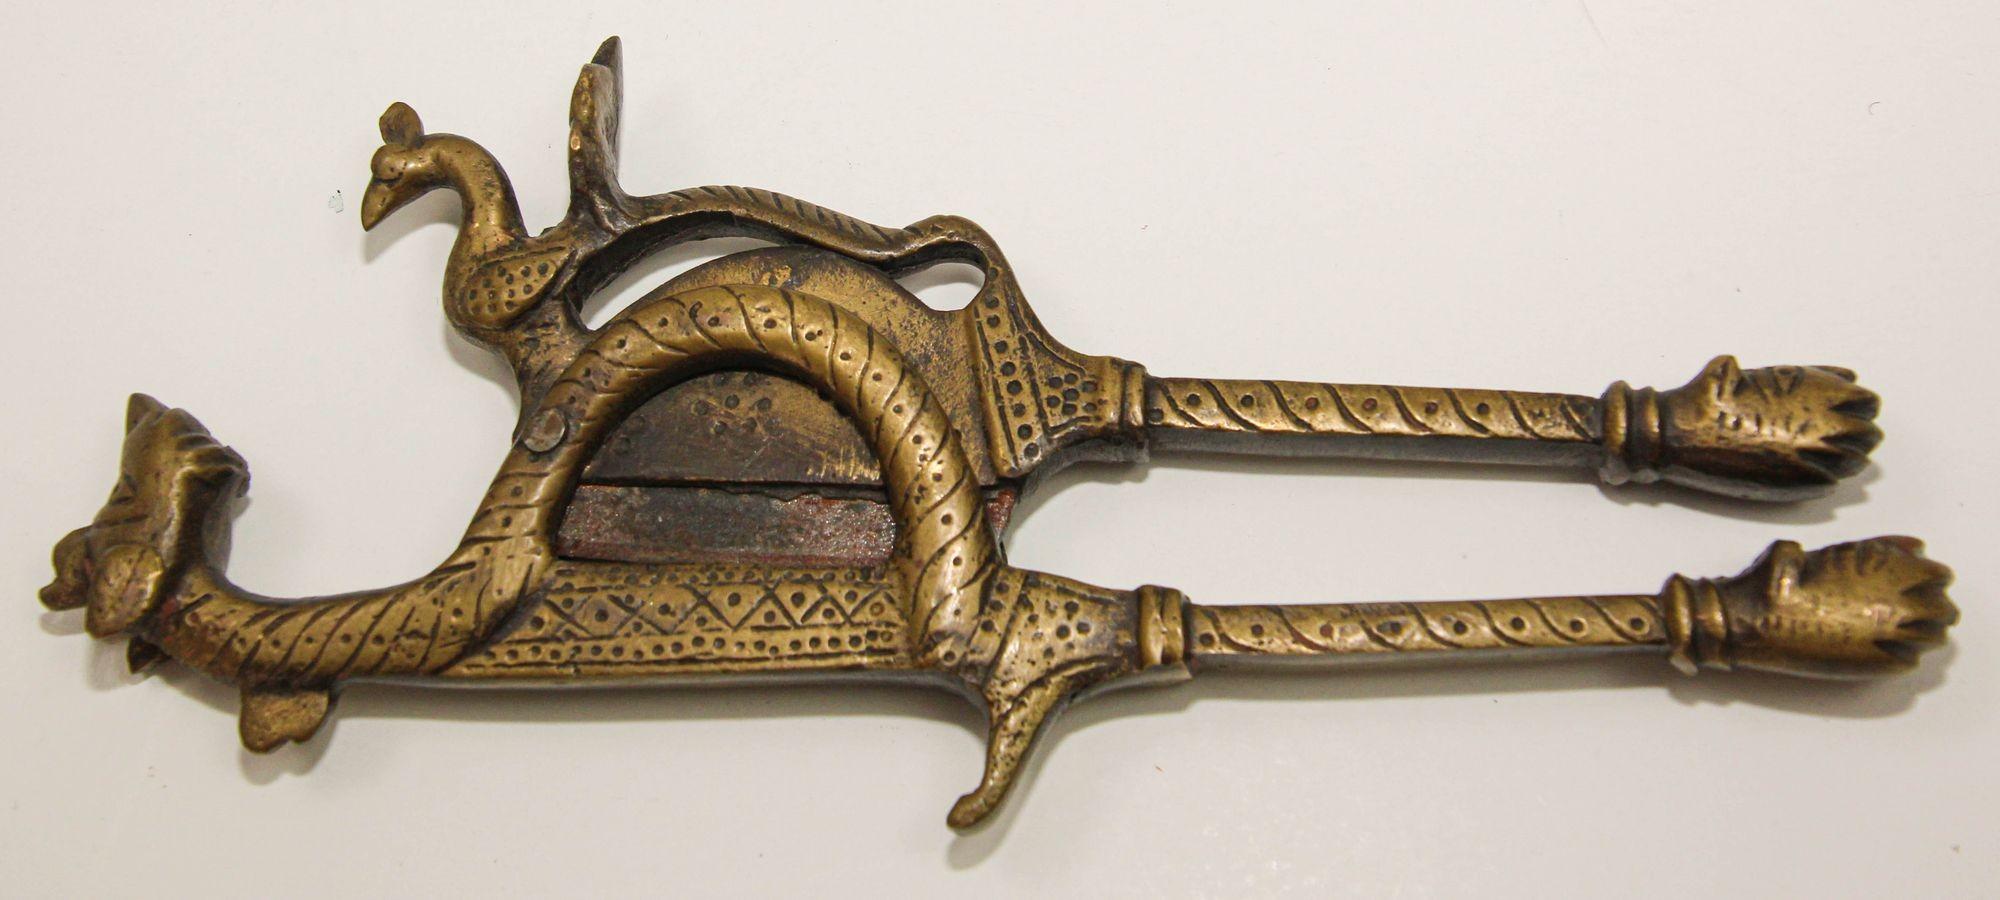 Antique Brass Betel Nut Cutters with Dragon Motif from India Areca nut Cutter For Sale 14